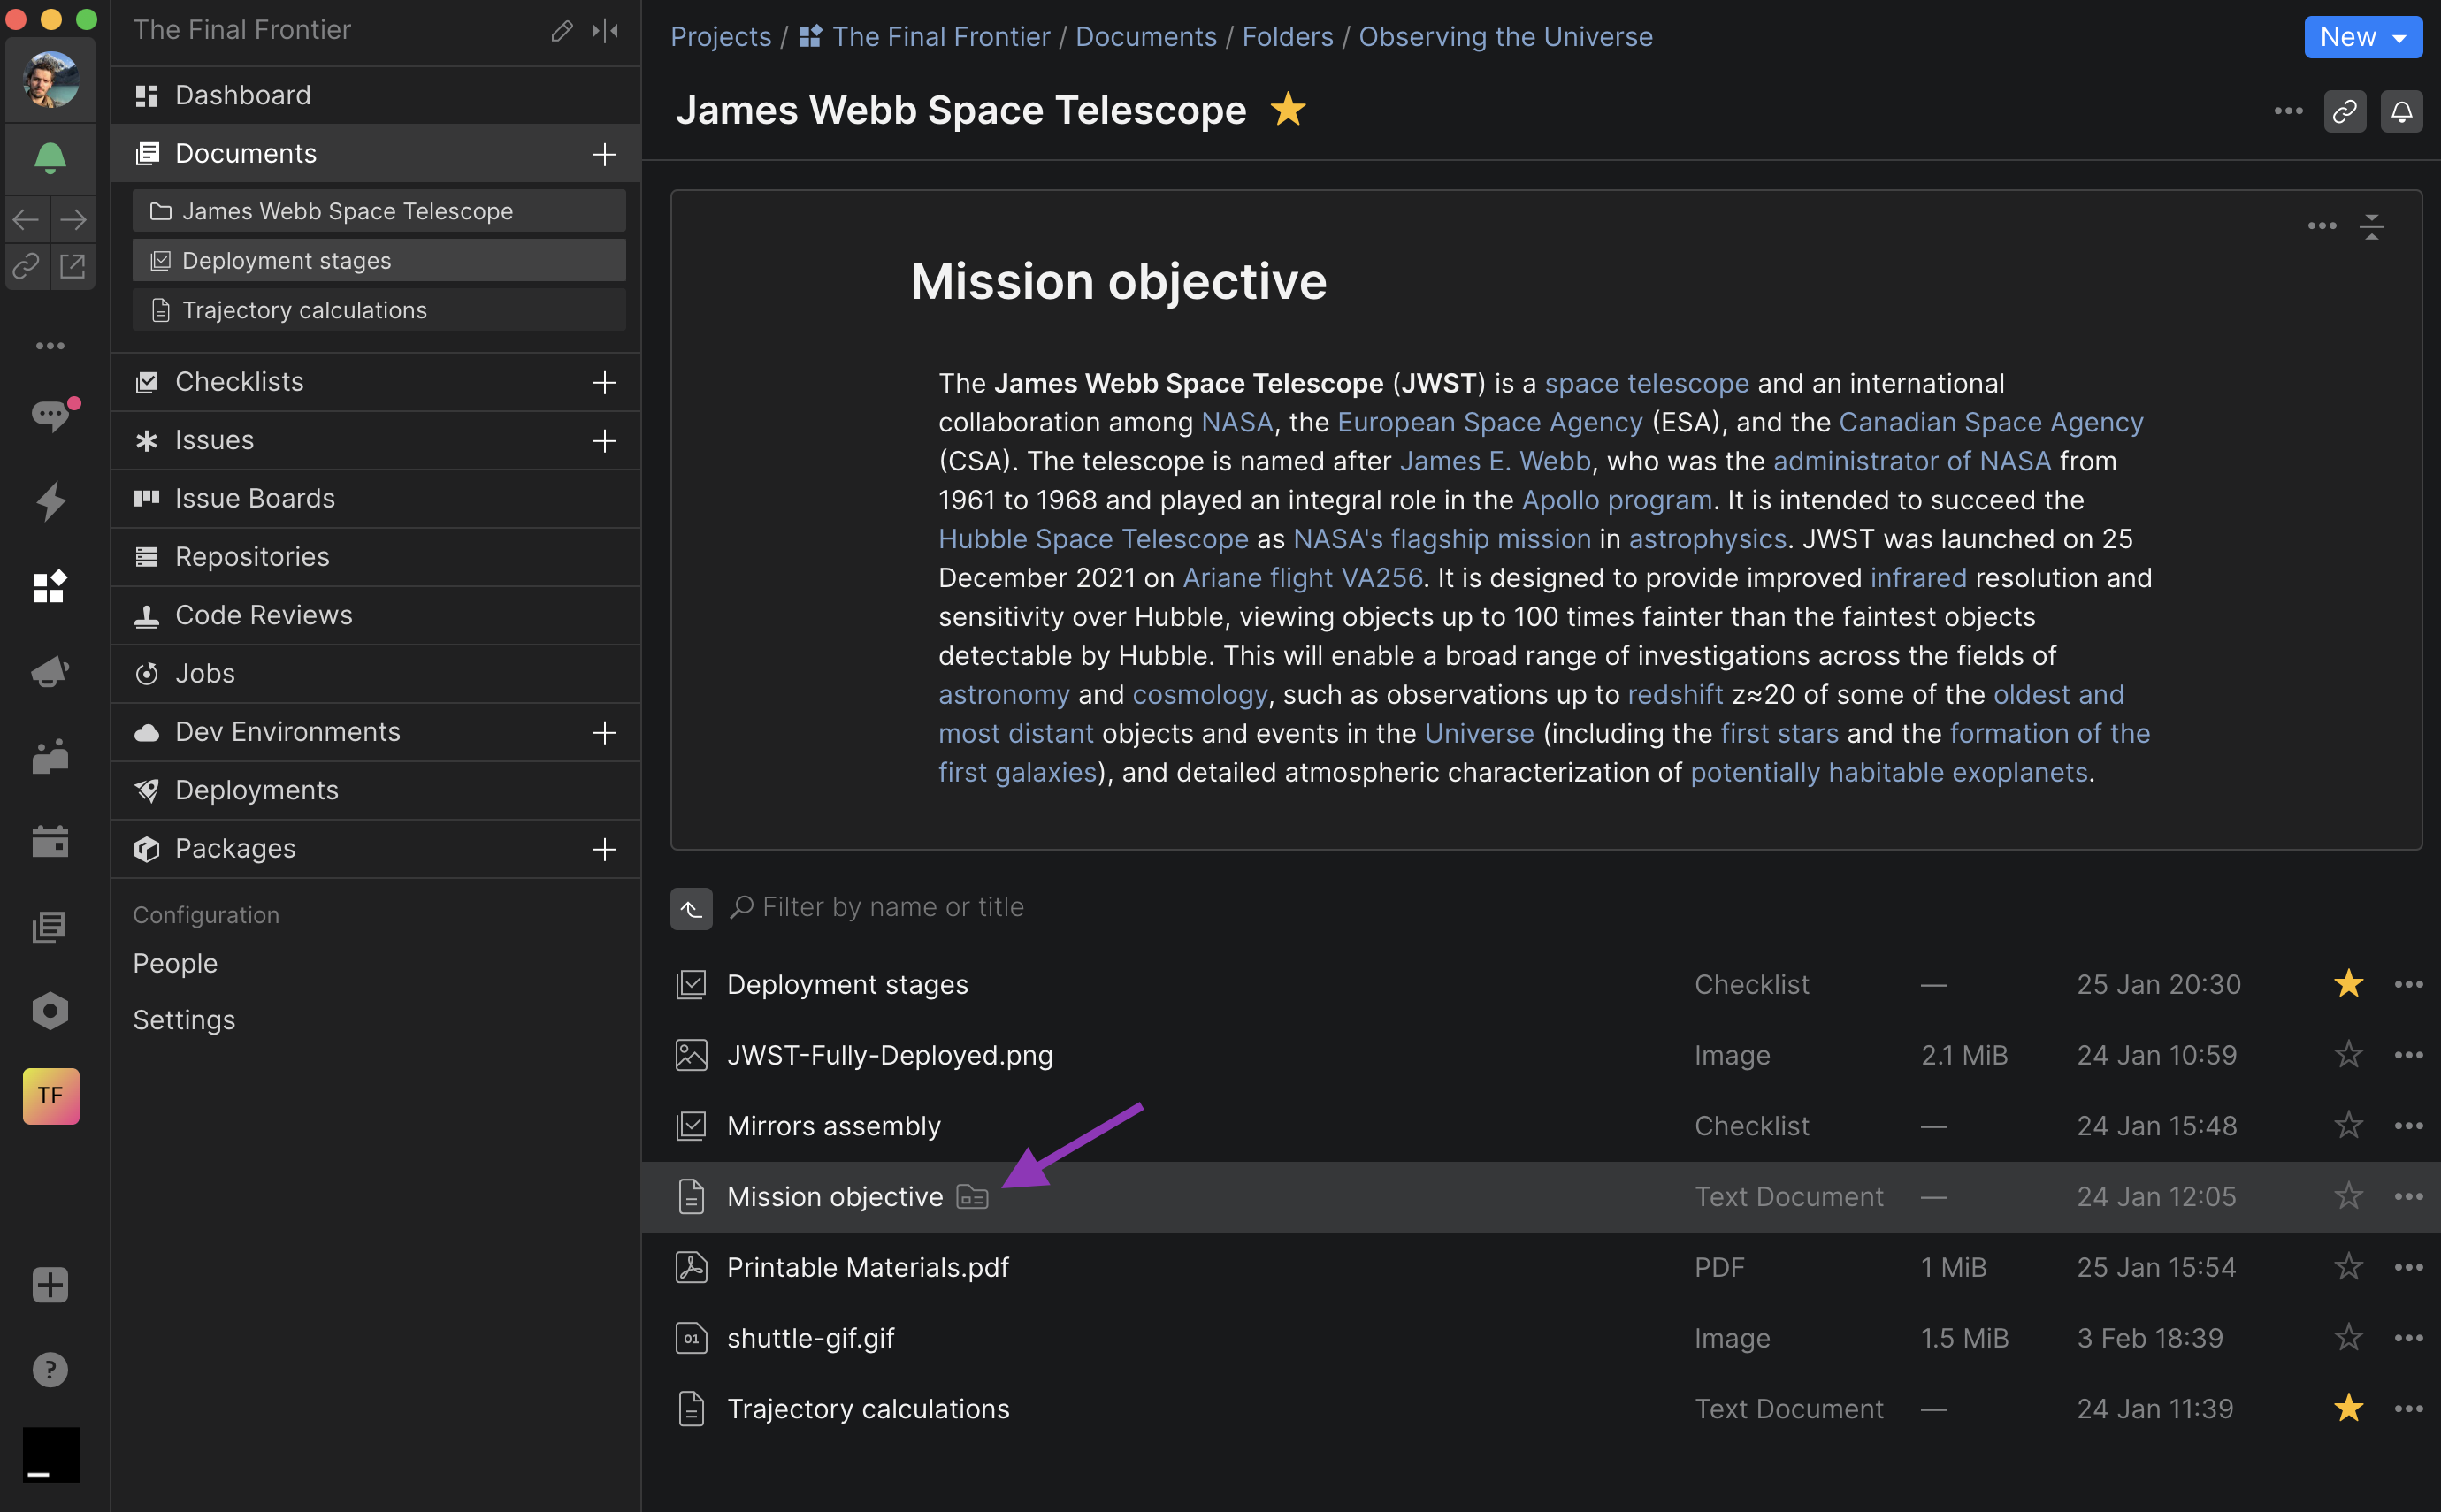 Folder Introduction in Space Documents